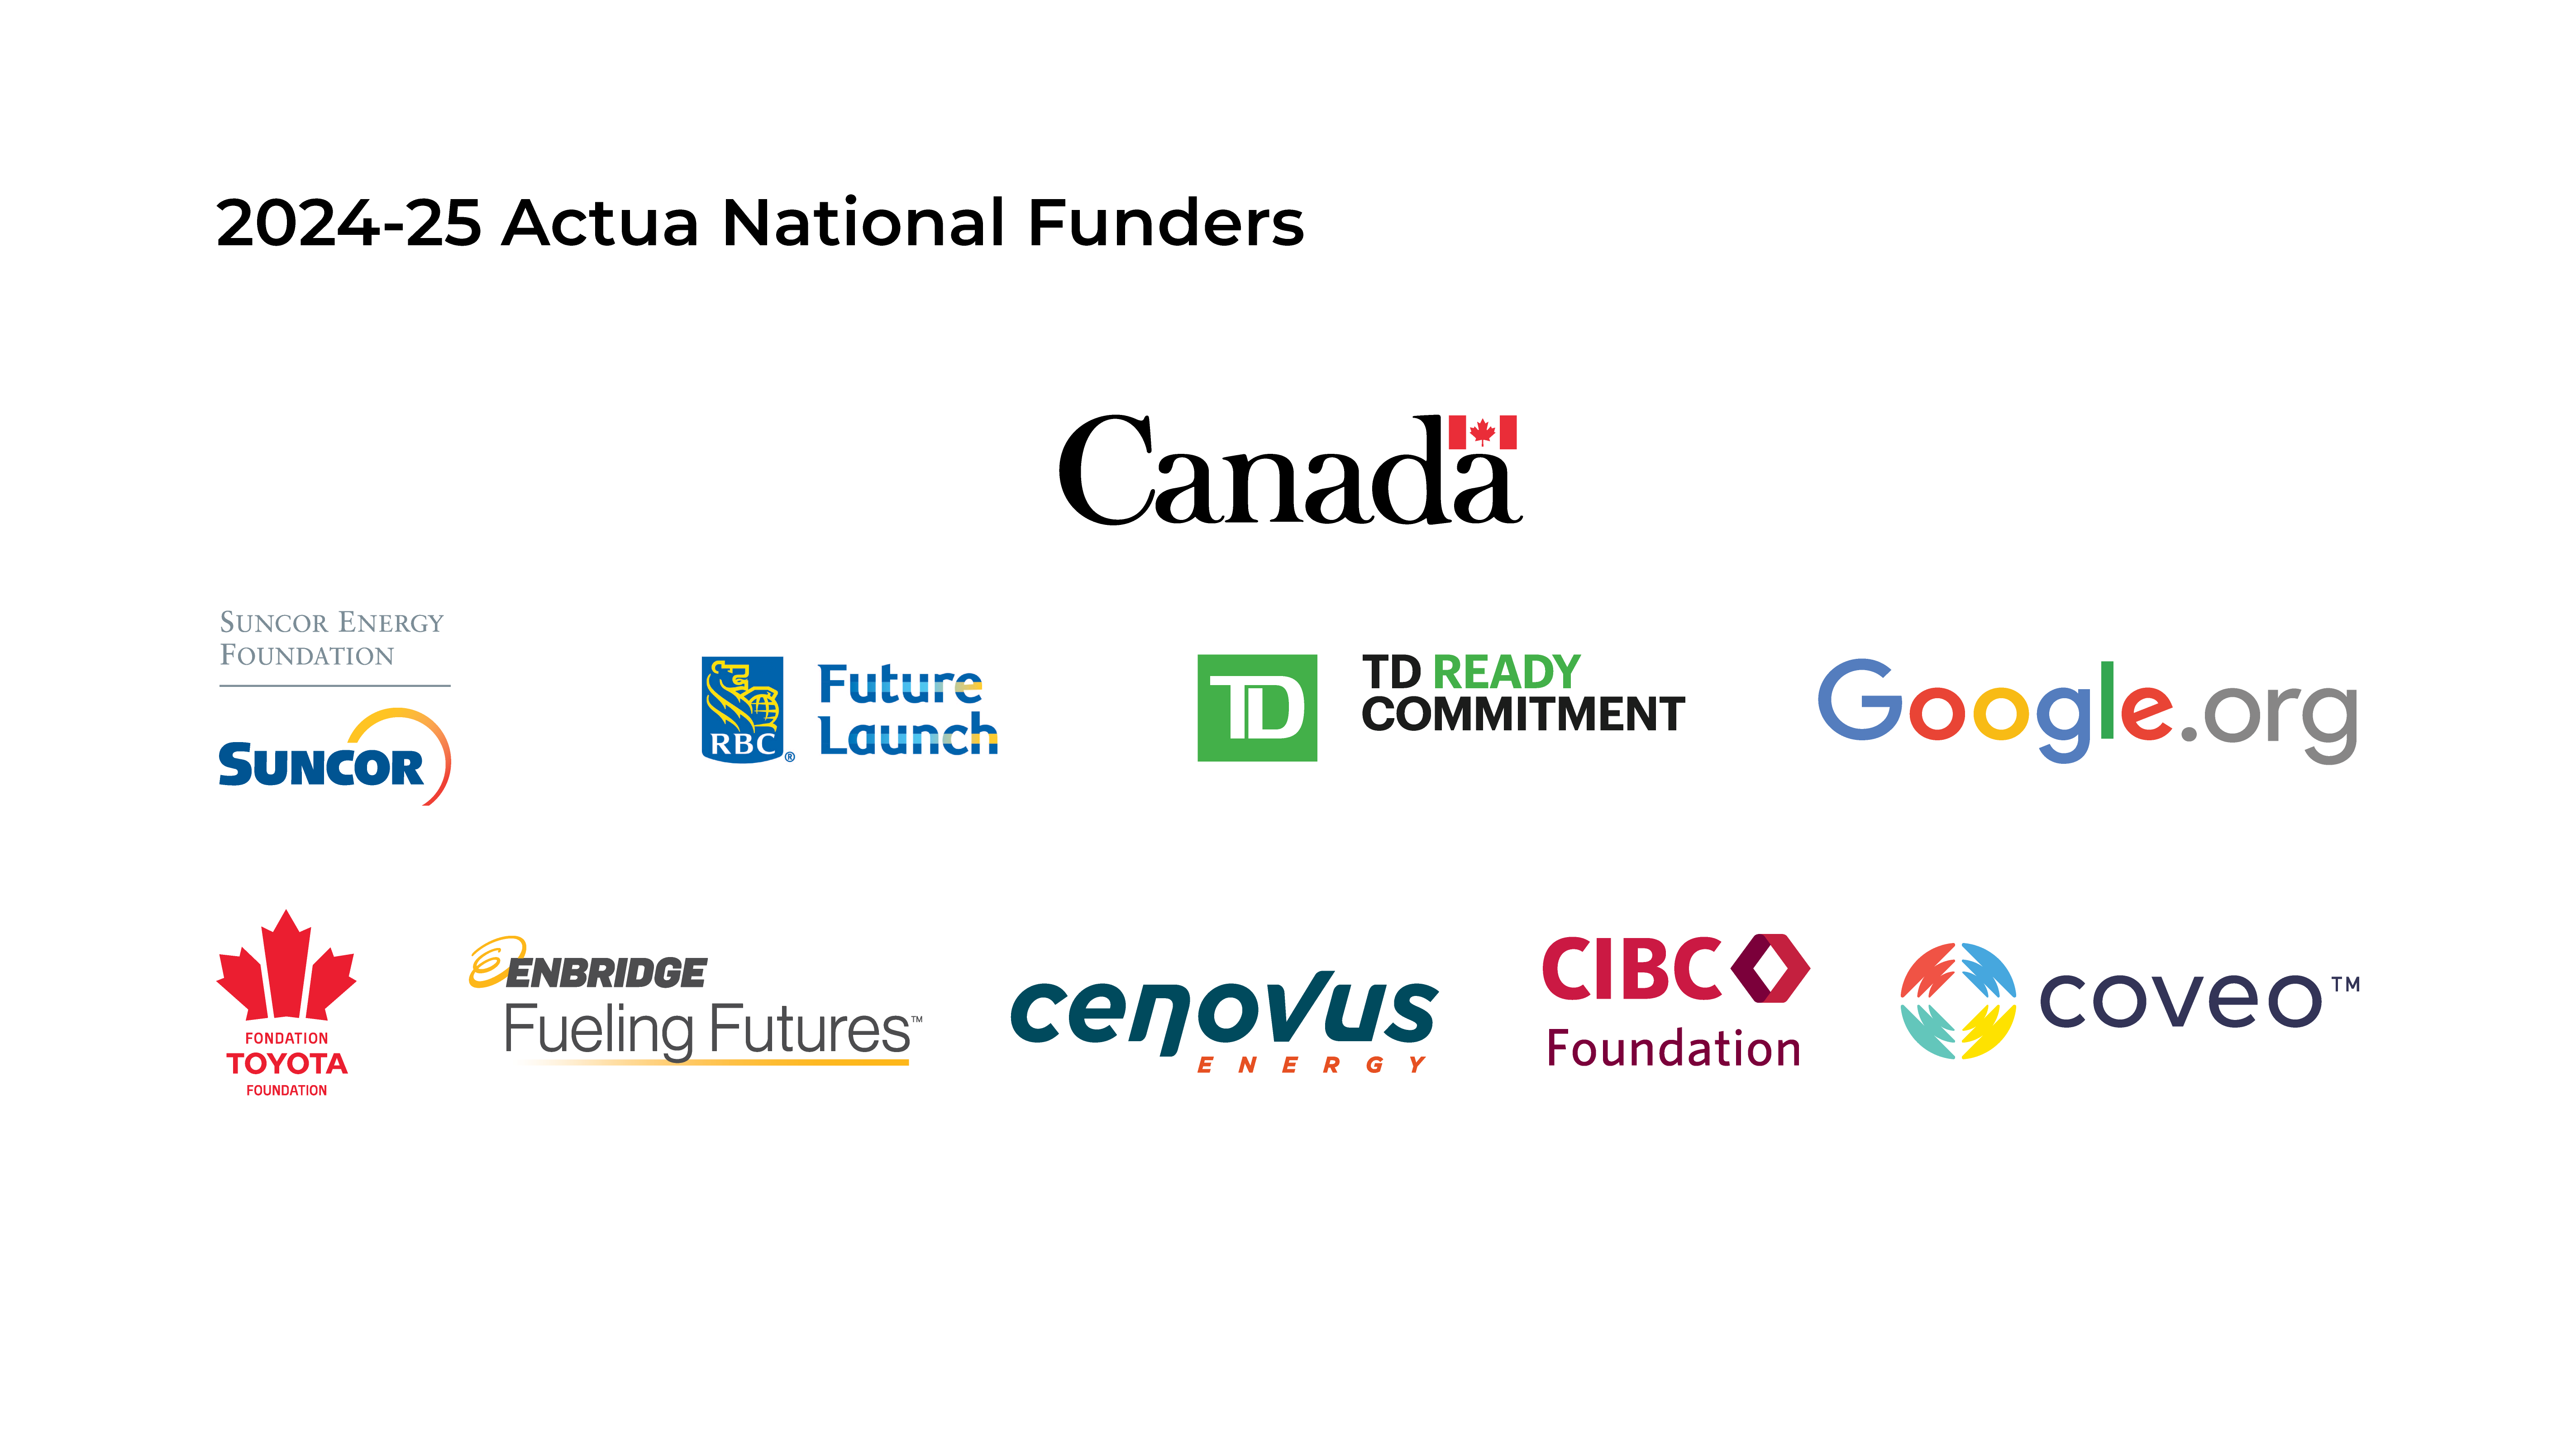 2024 and 2025 Actual National Funders